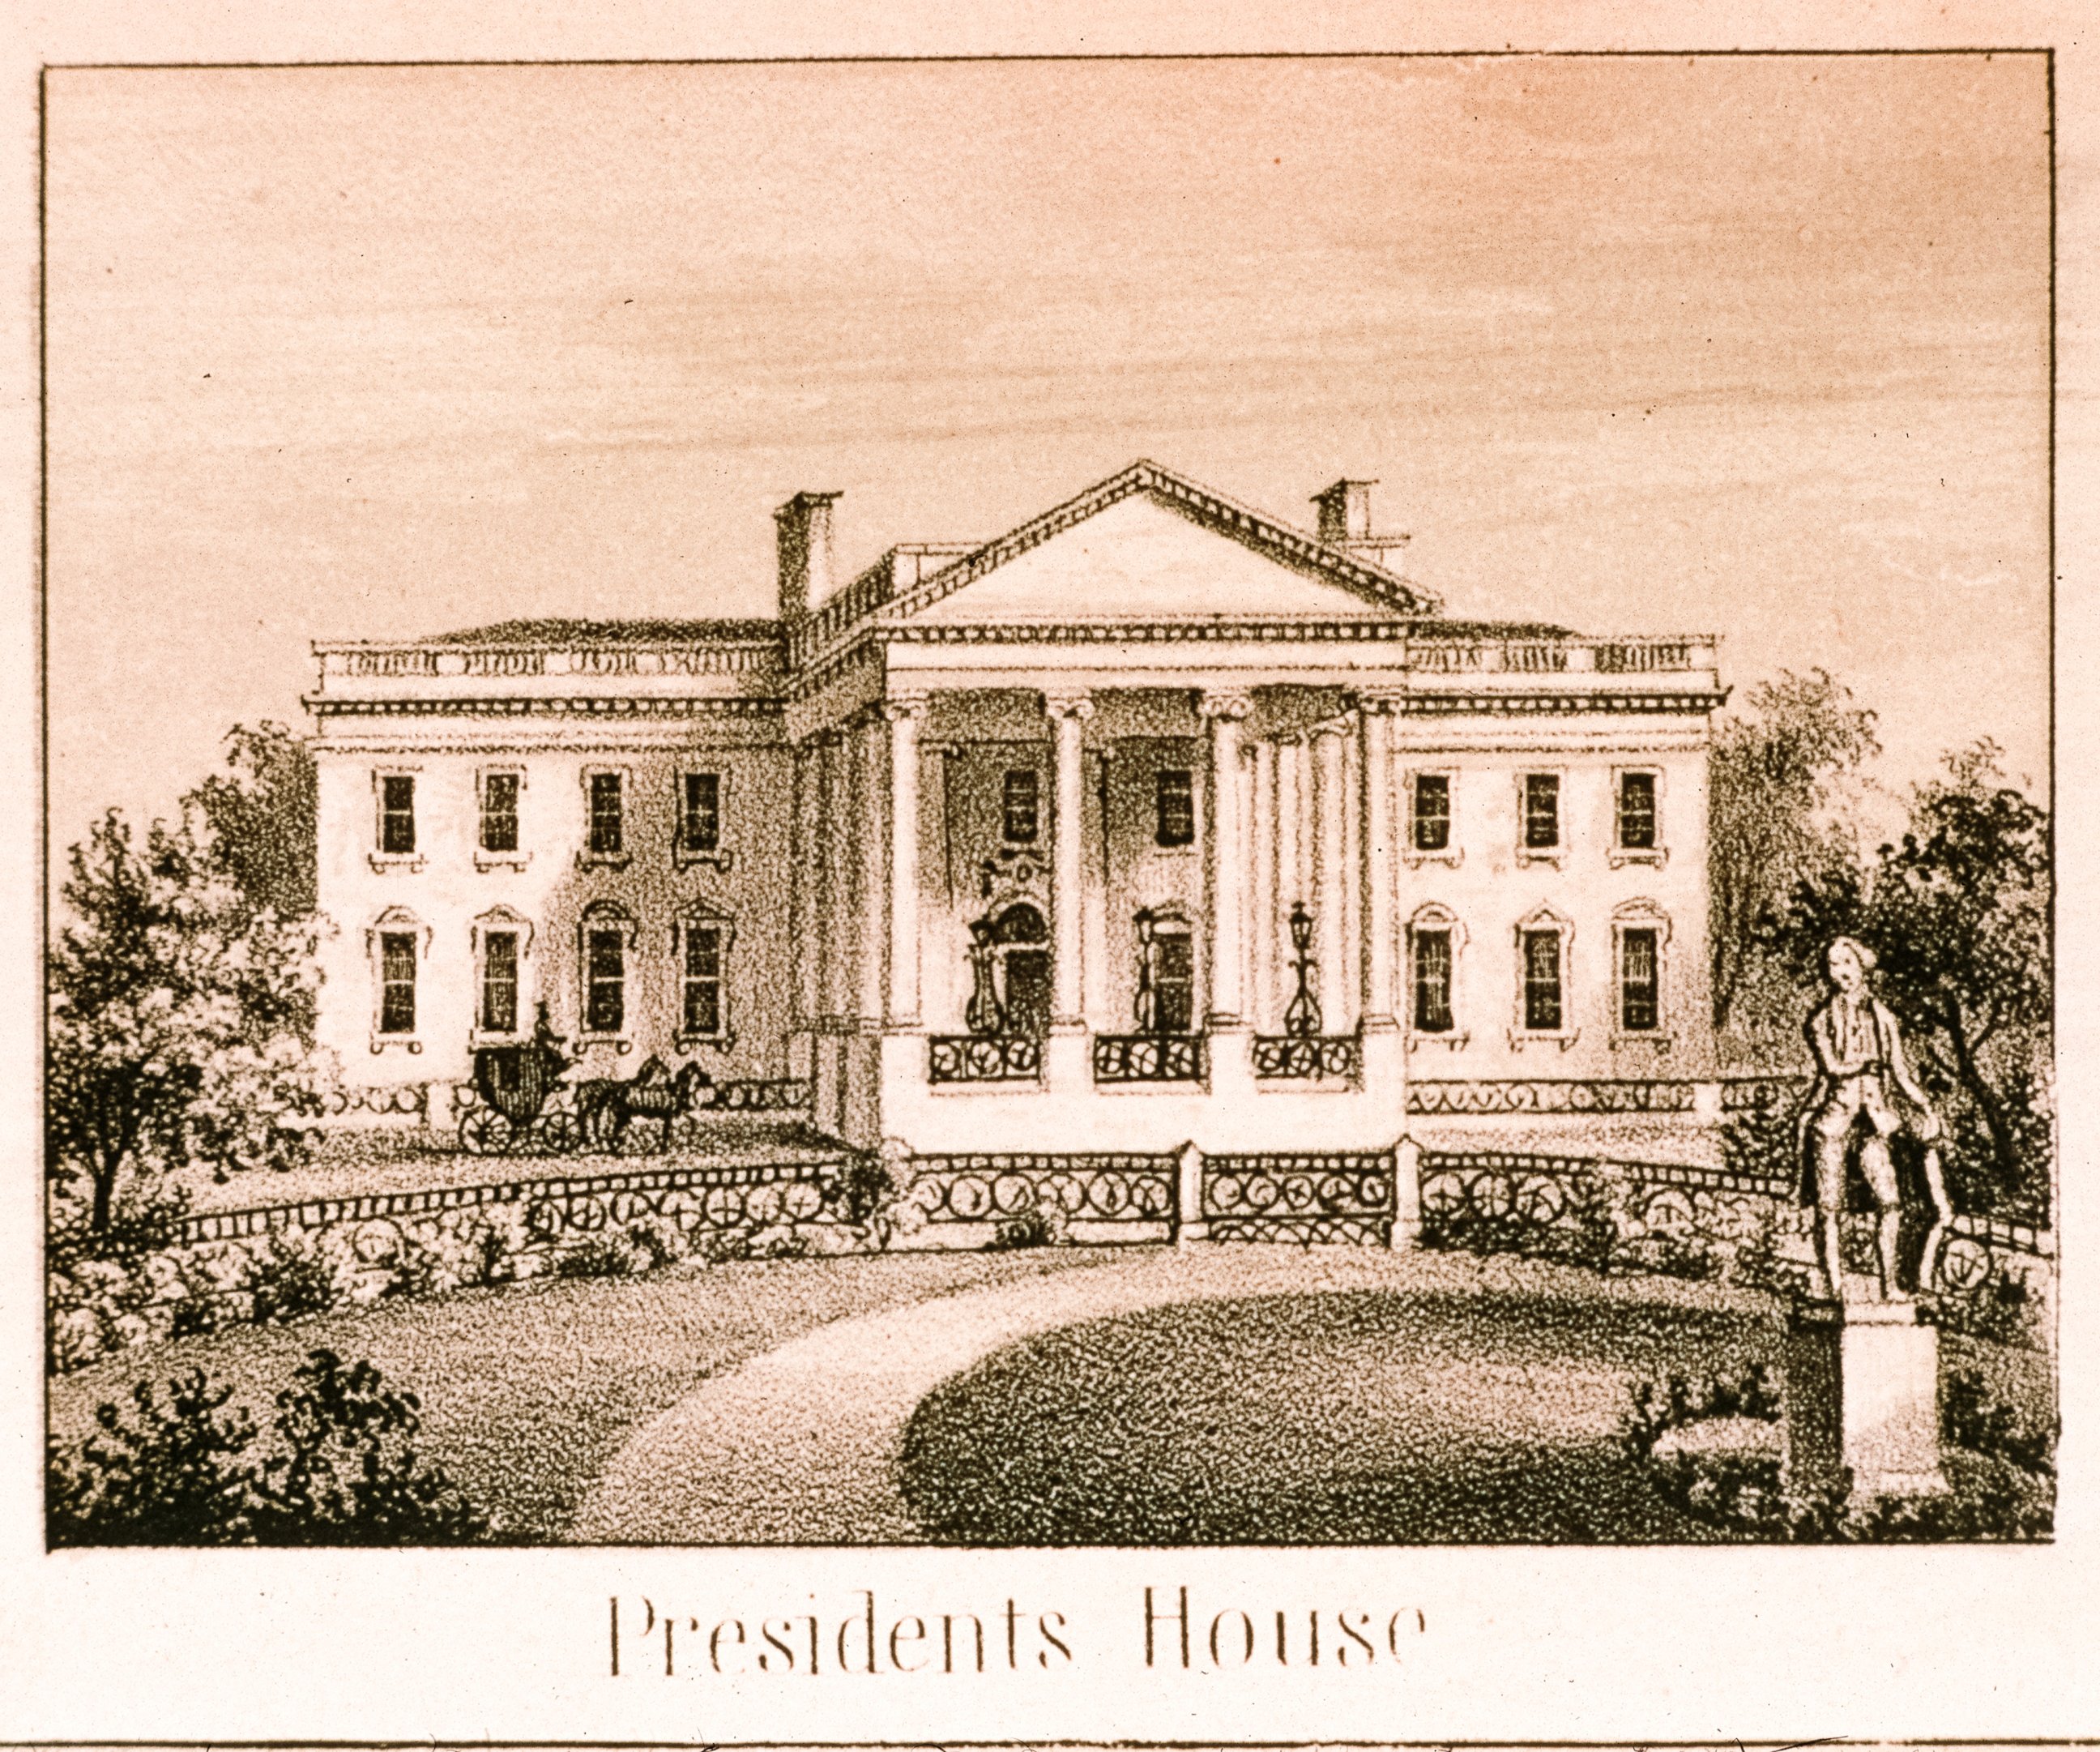 PHOTO: A portico with iconic columns graced the north facade after 1829. The ornamental iron fences were installed in 1833.